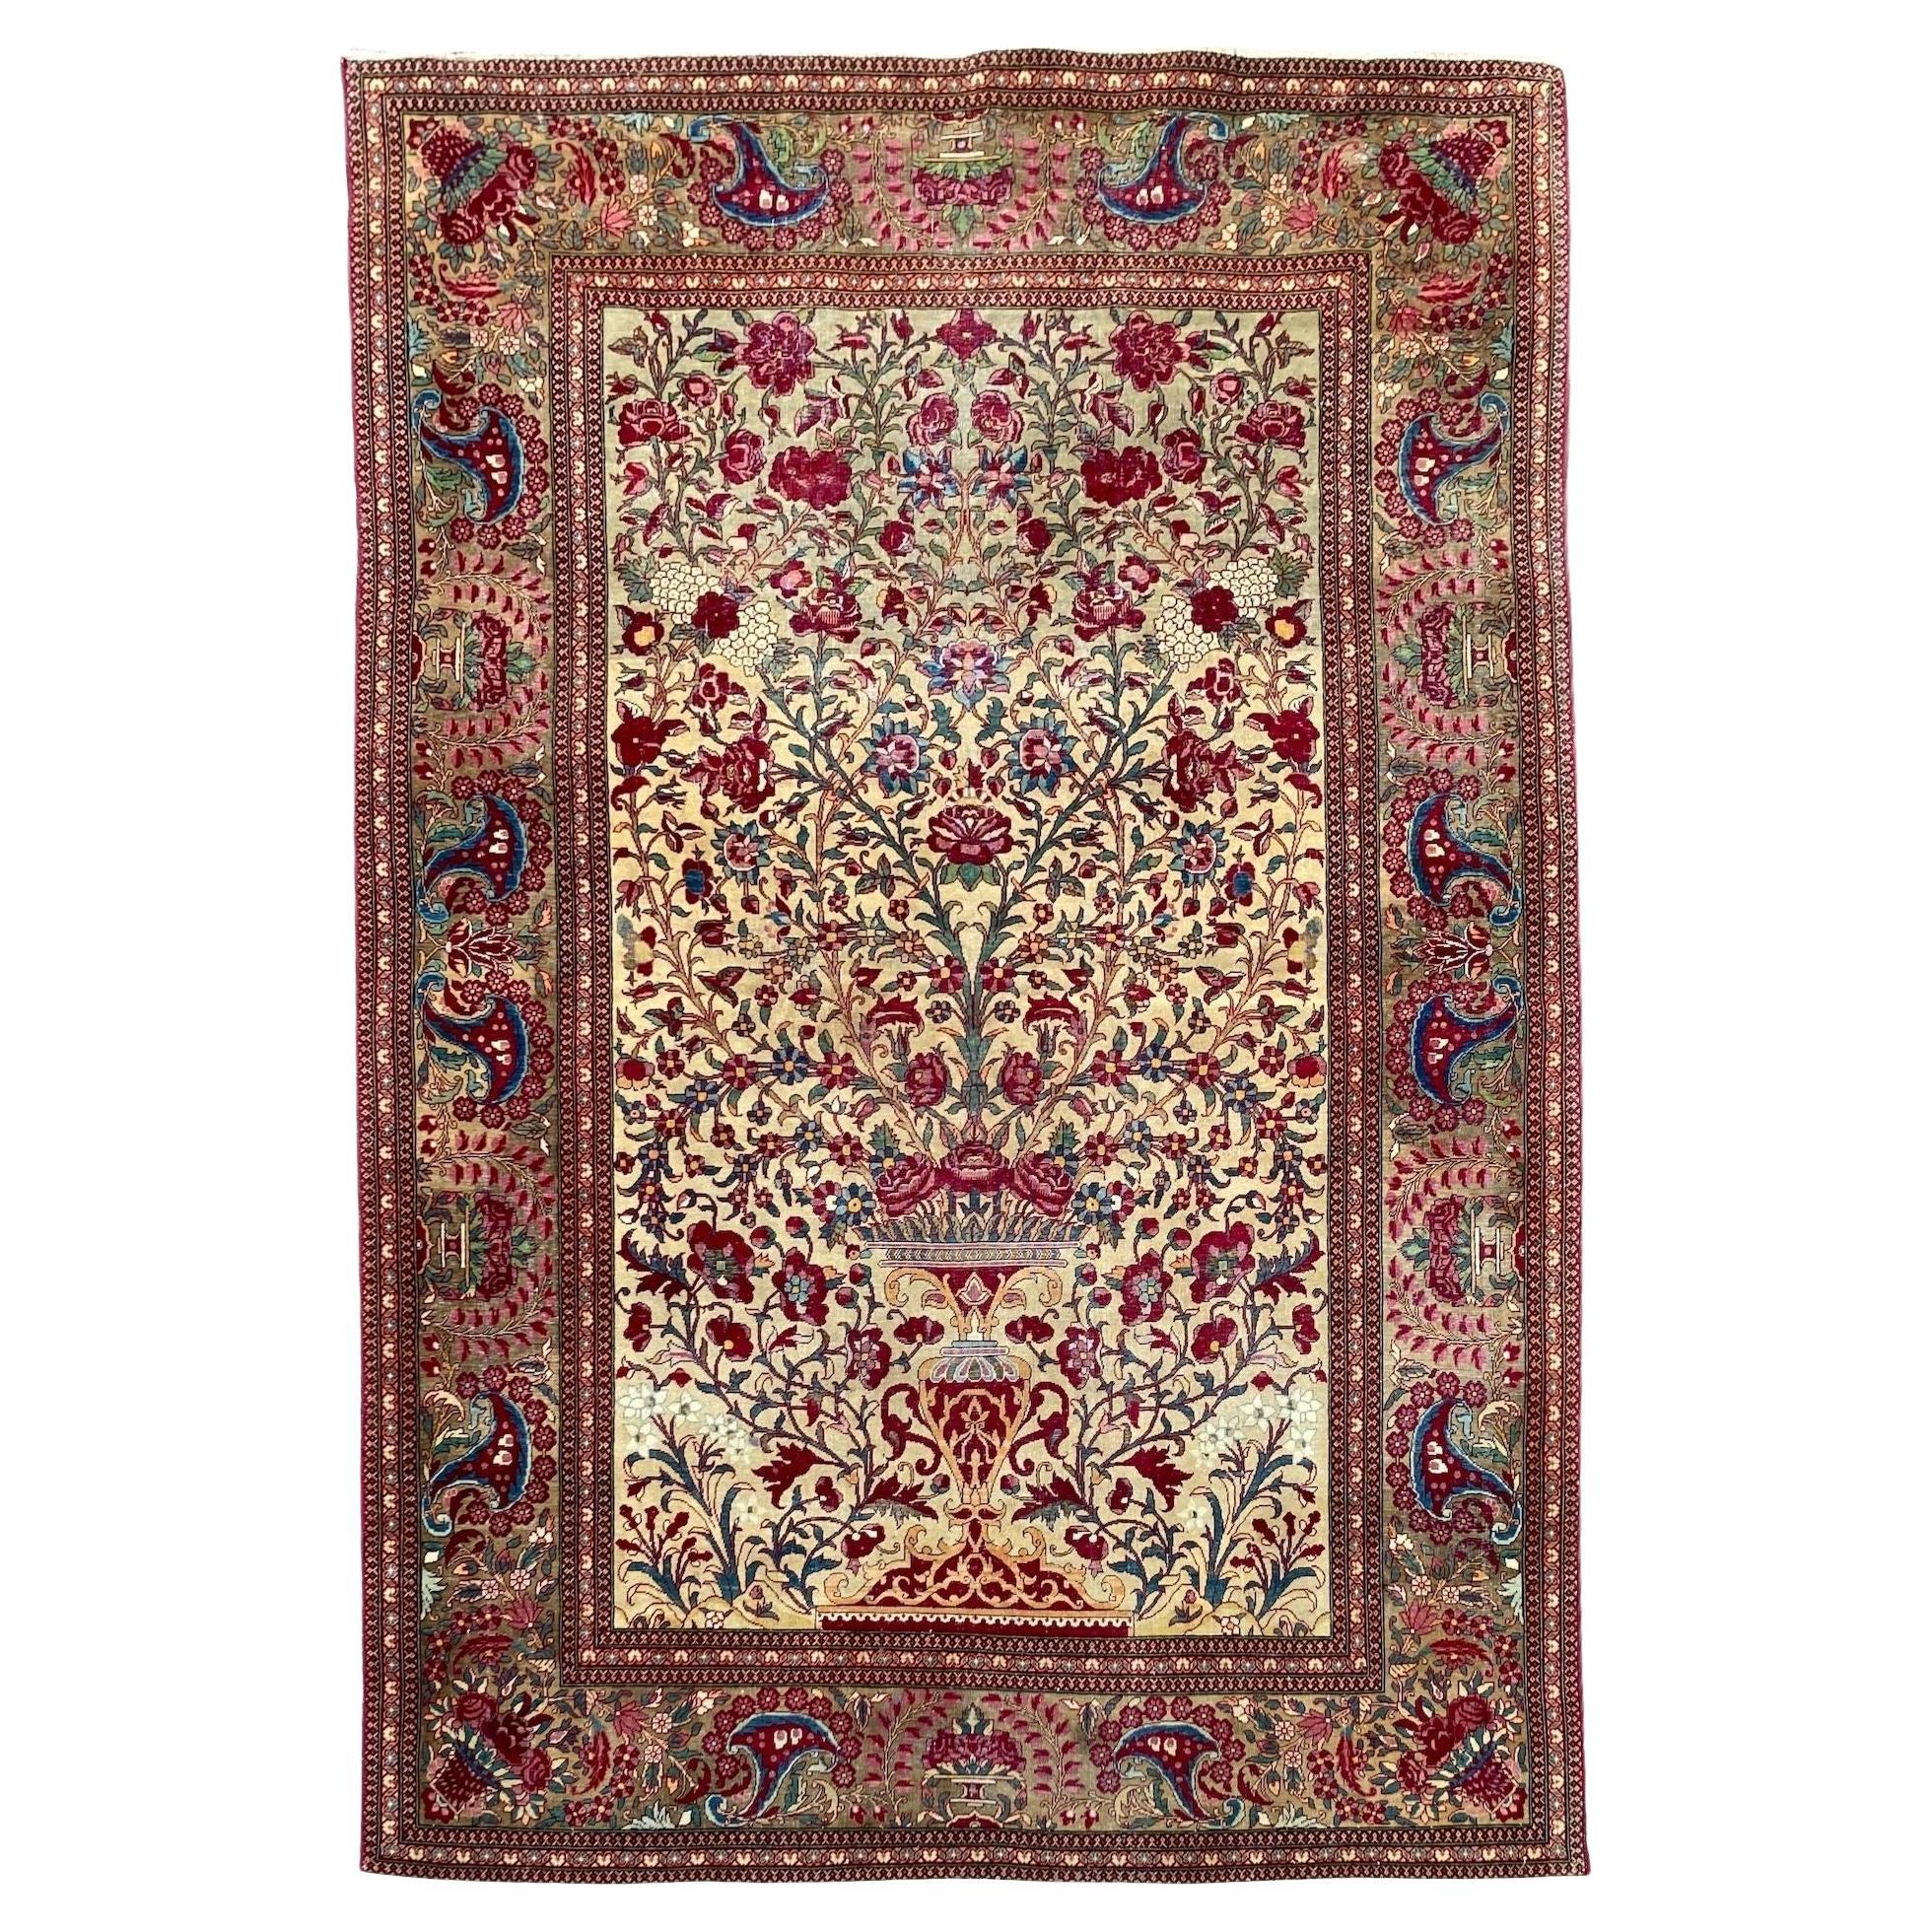 Antique Isfahan Rug 2.04m x 1.38m For Sale